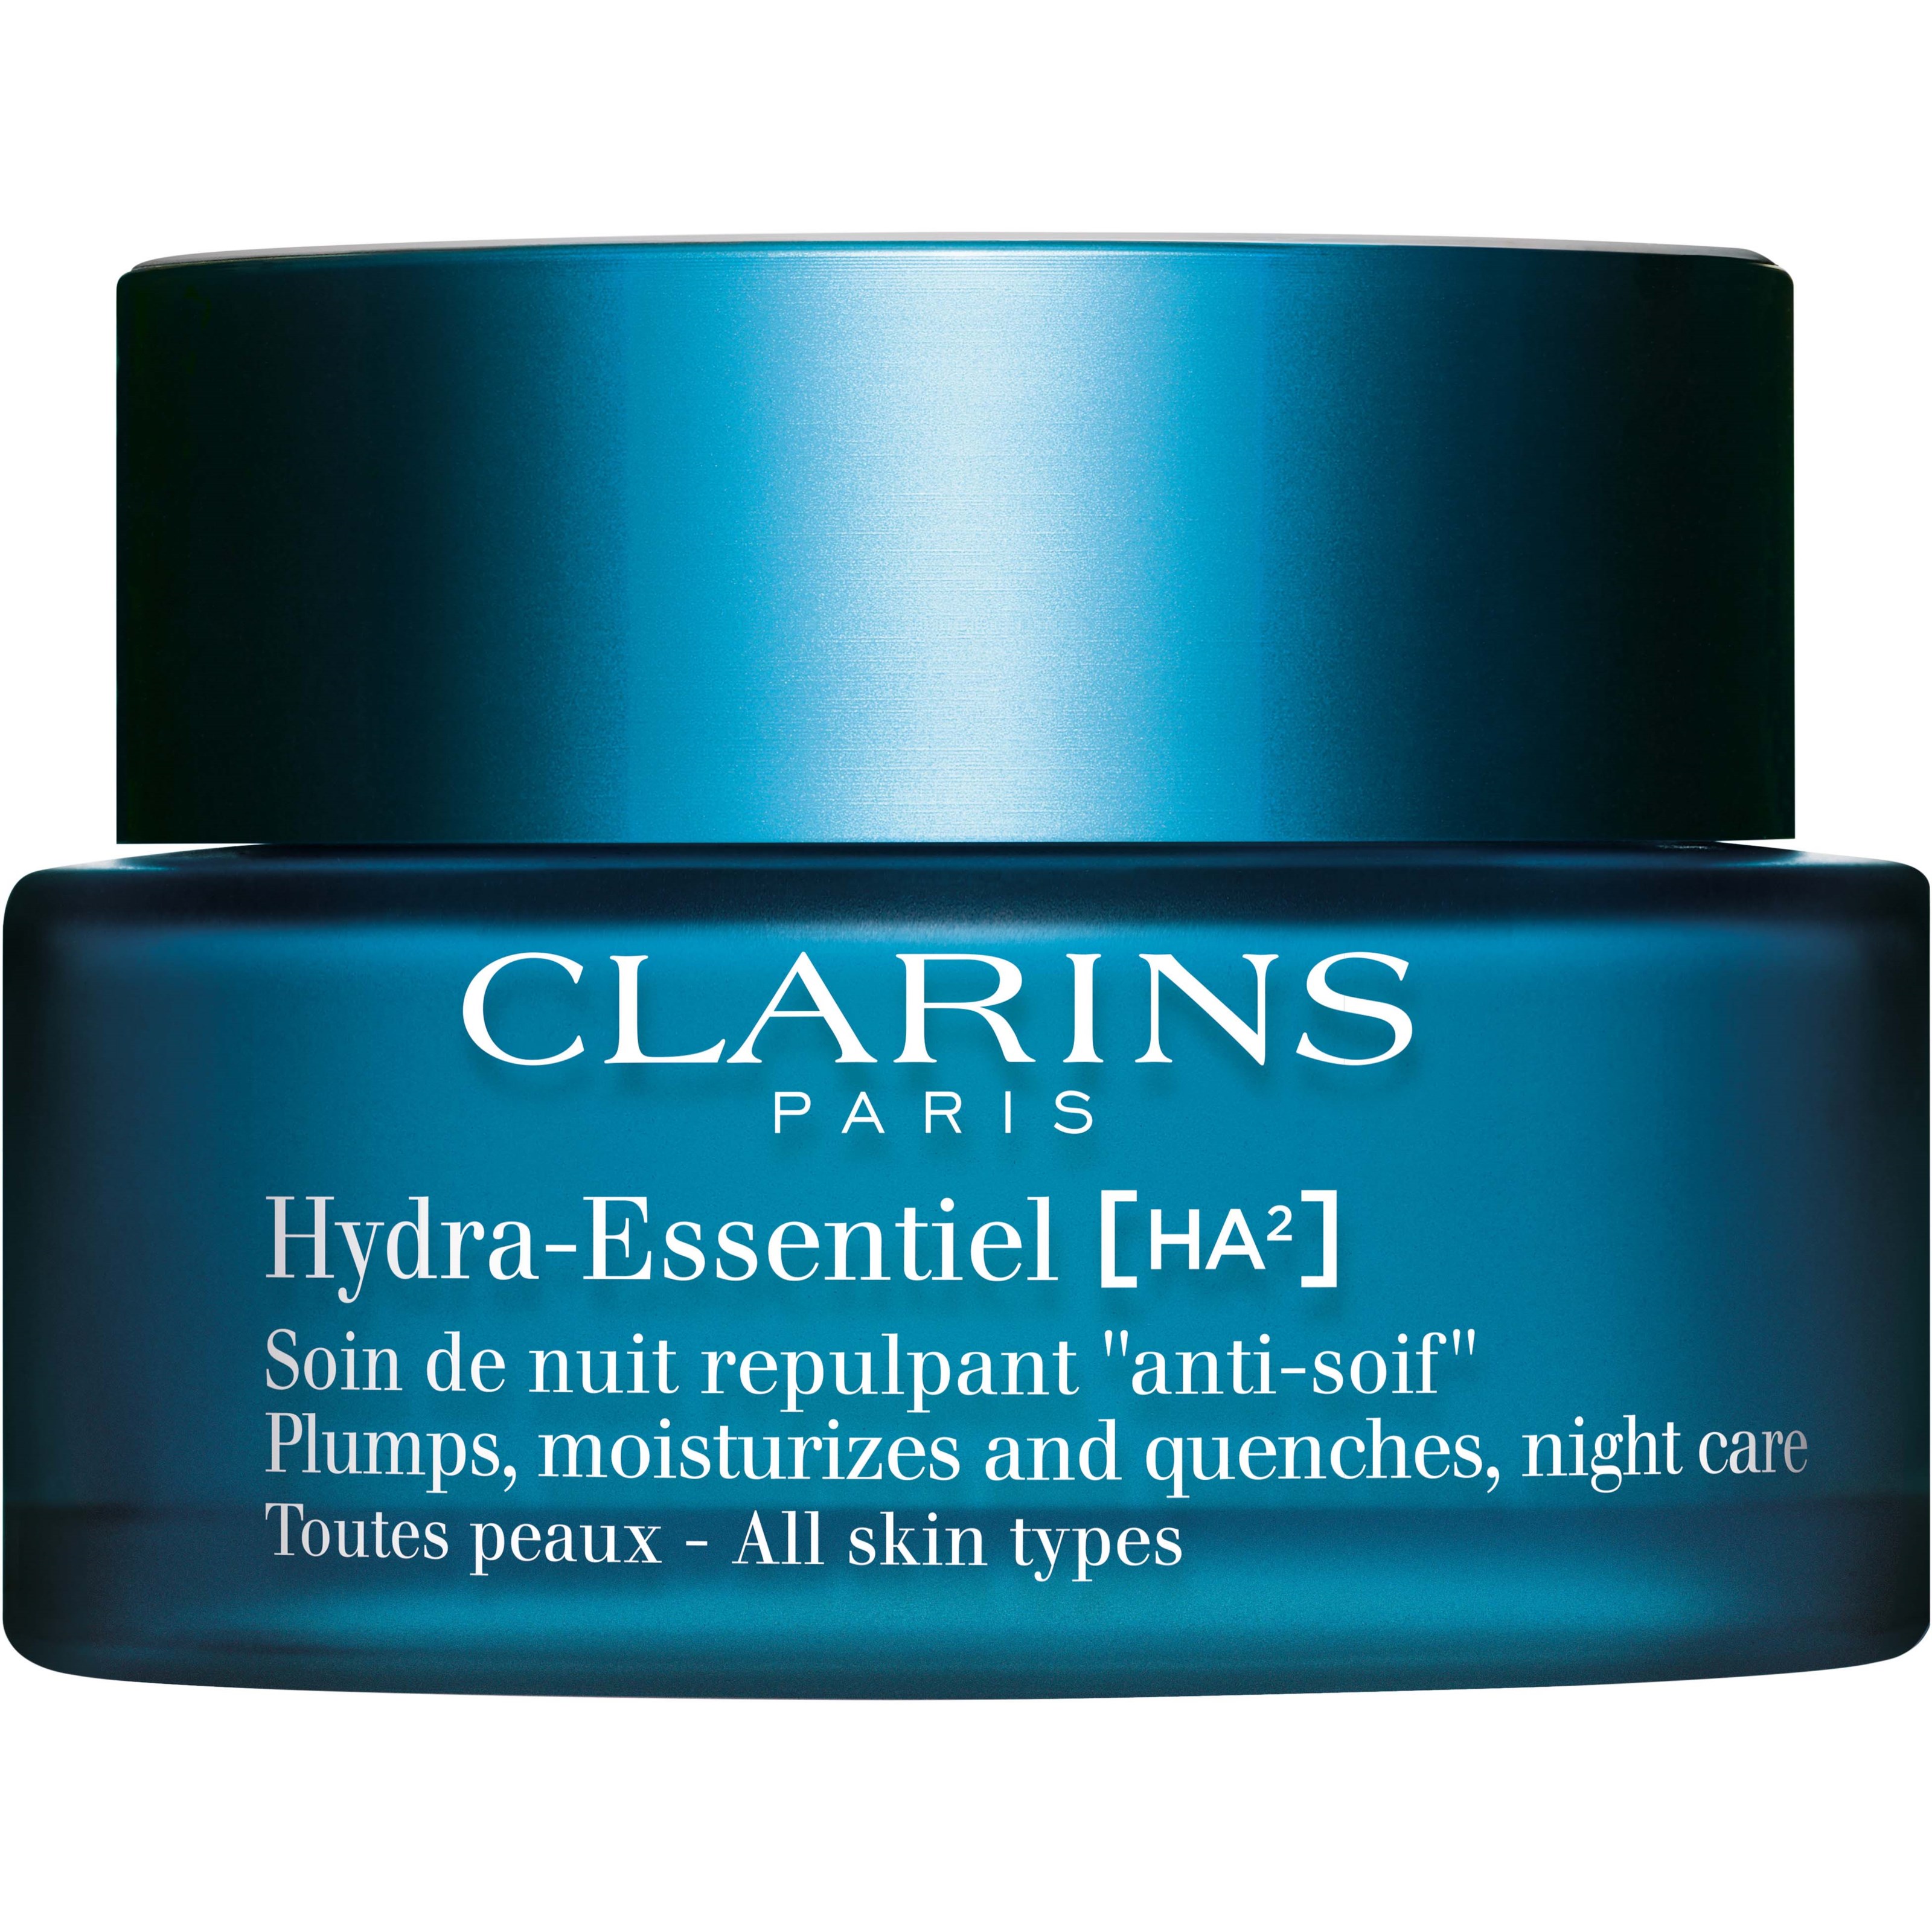 Clarins Hydra-Essentiel Plumps, Moisturizes and Quenches, Night Care 5